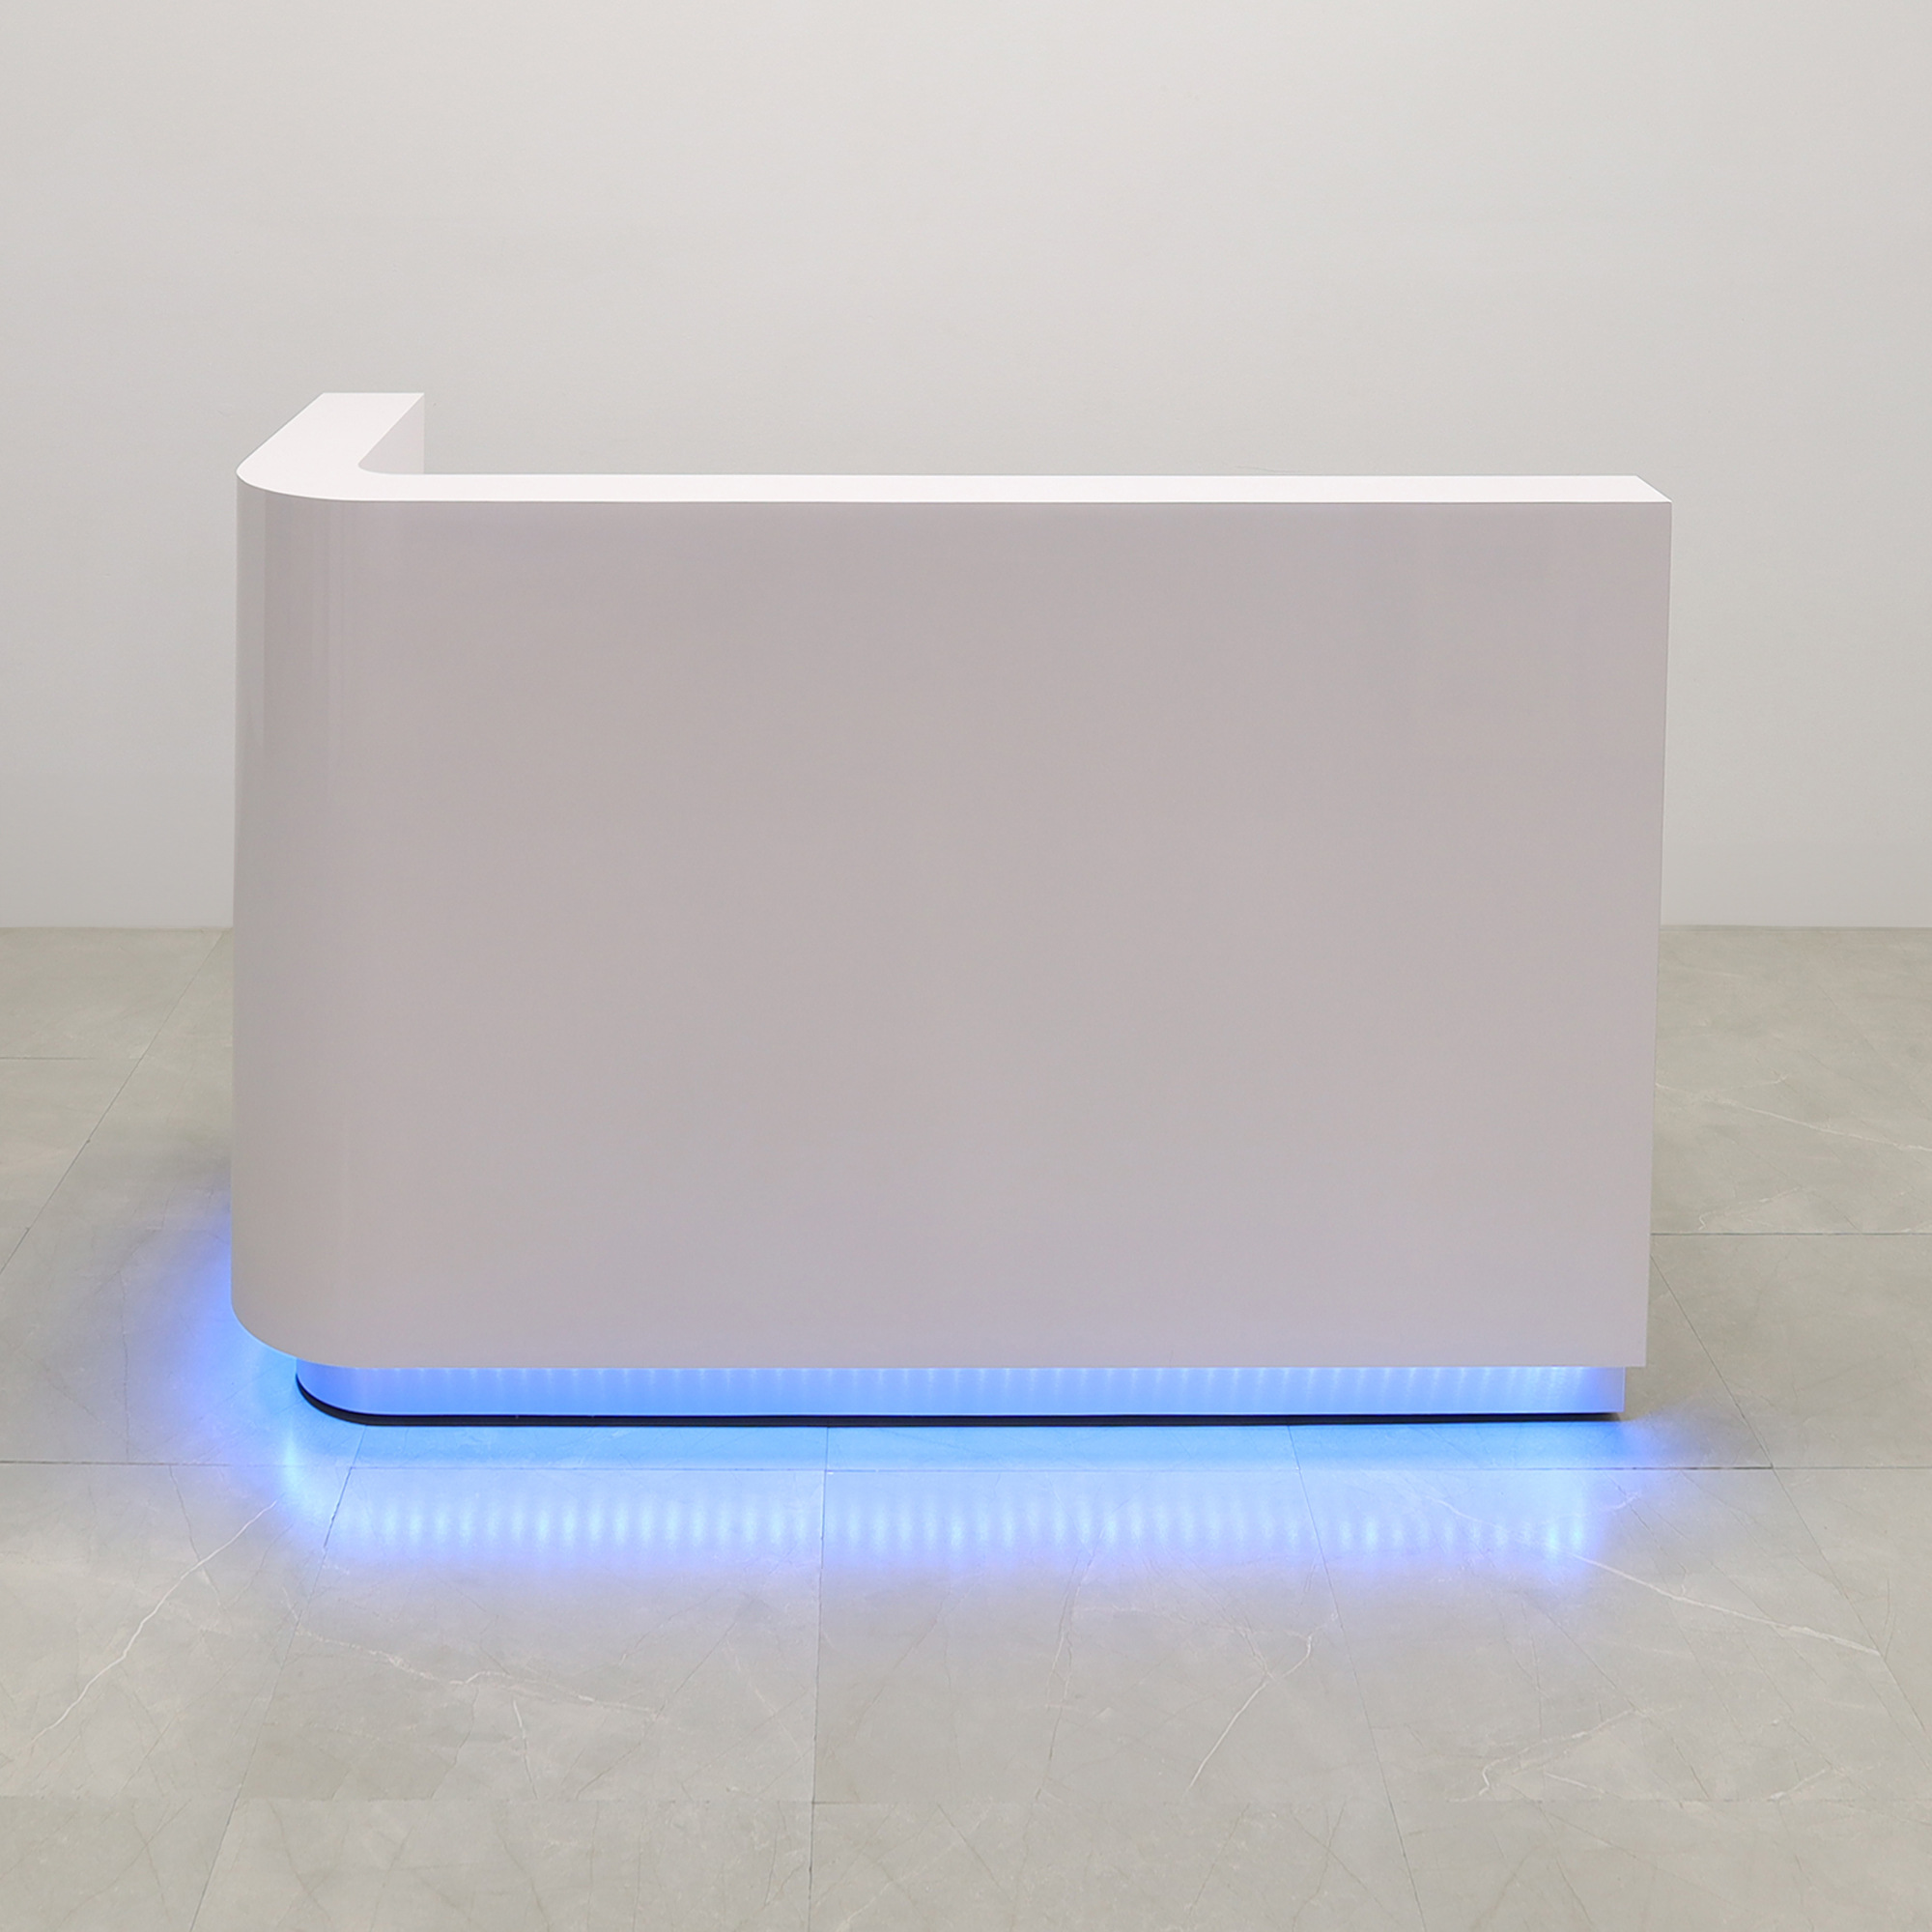 72-inch Nola L-Shape Custom Reception Desk, left side l-panel in white gloss laminate main desk and brushed aluminum toe-kick, with color LED, shown here.